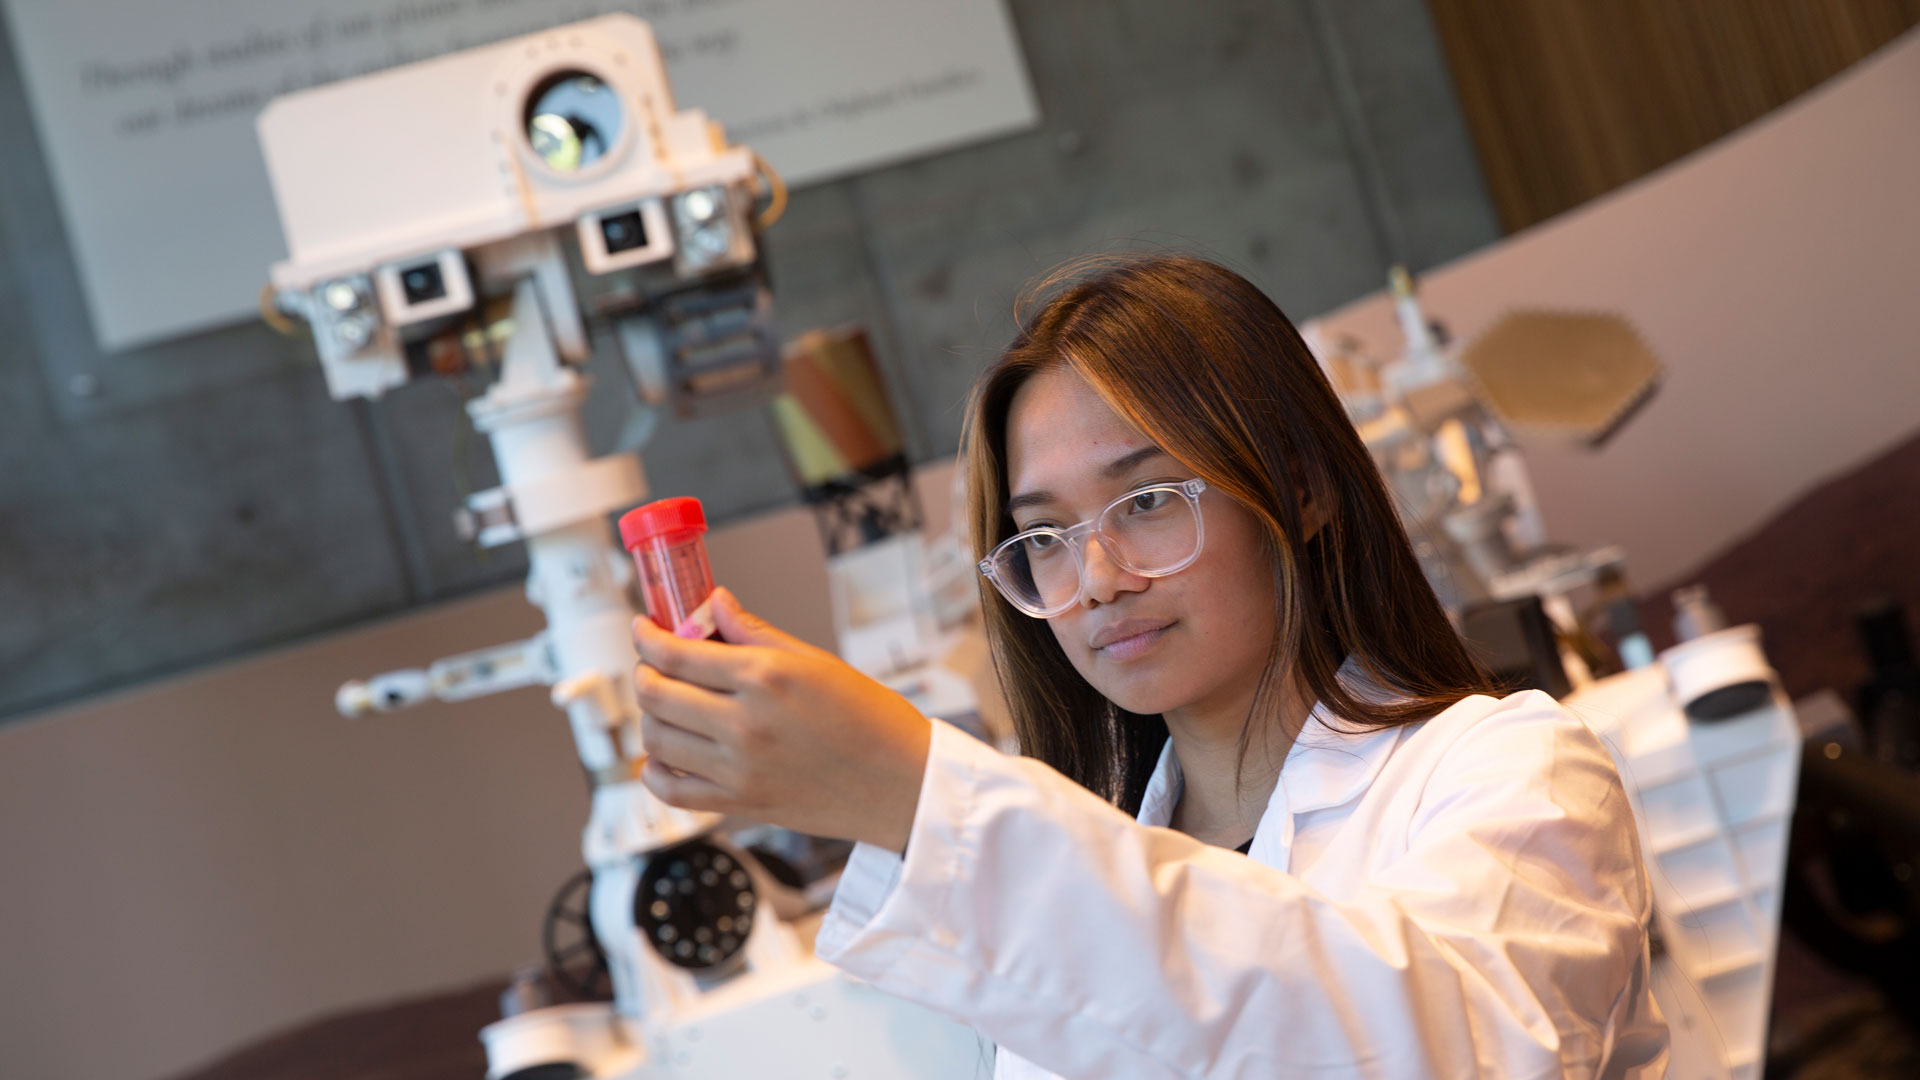 Biomedical engineering student Joy Agus stands in front of a model of a Mars rover with a vial of red liquid, demonstrating her research in the FURI program at the Ira A. Fulton Schools of Engineering at ASU.